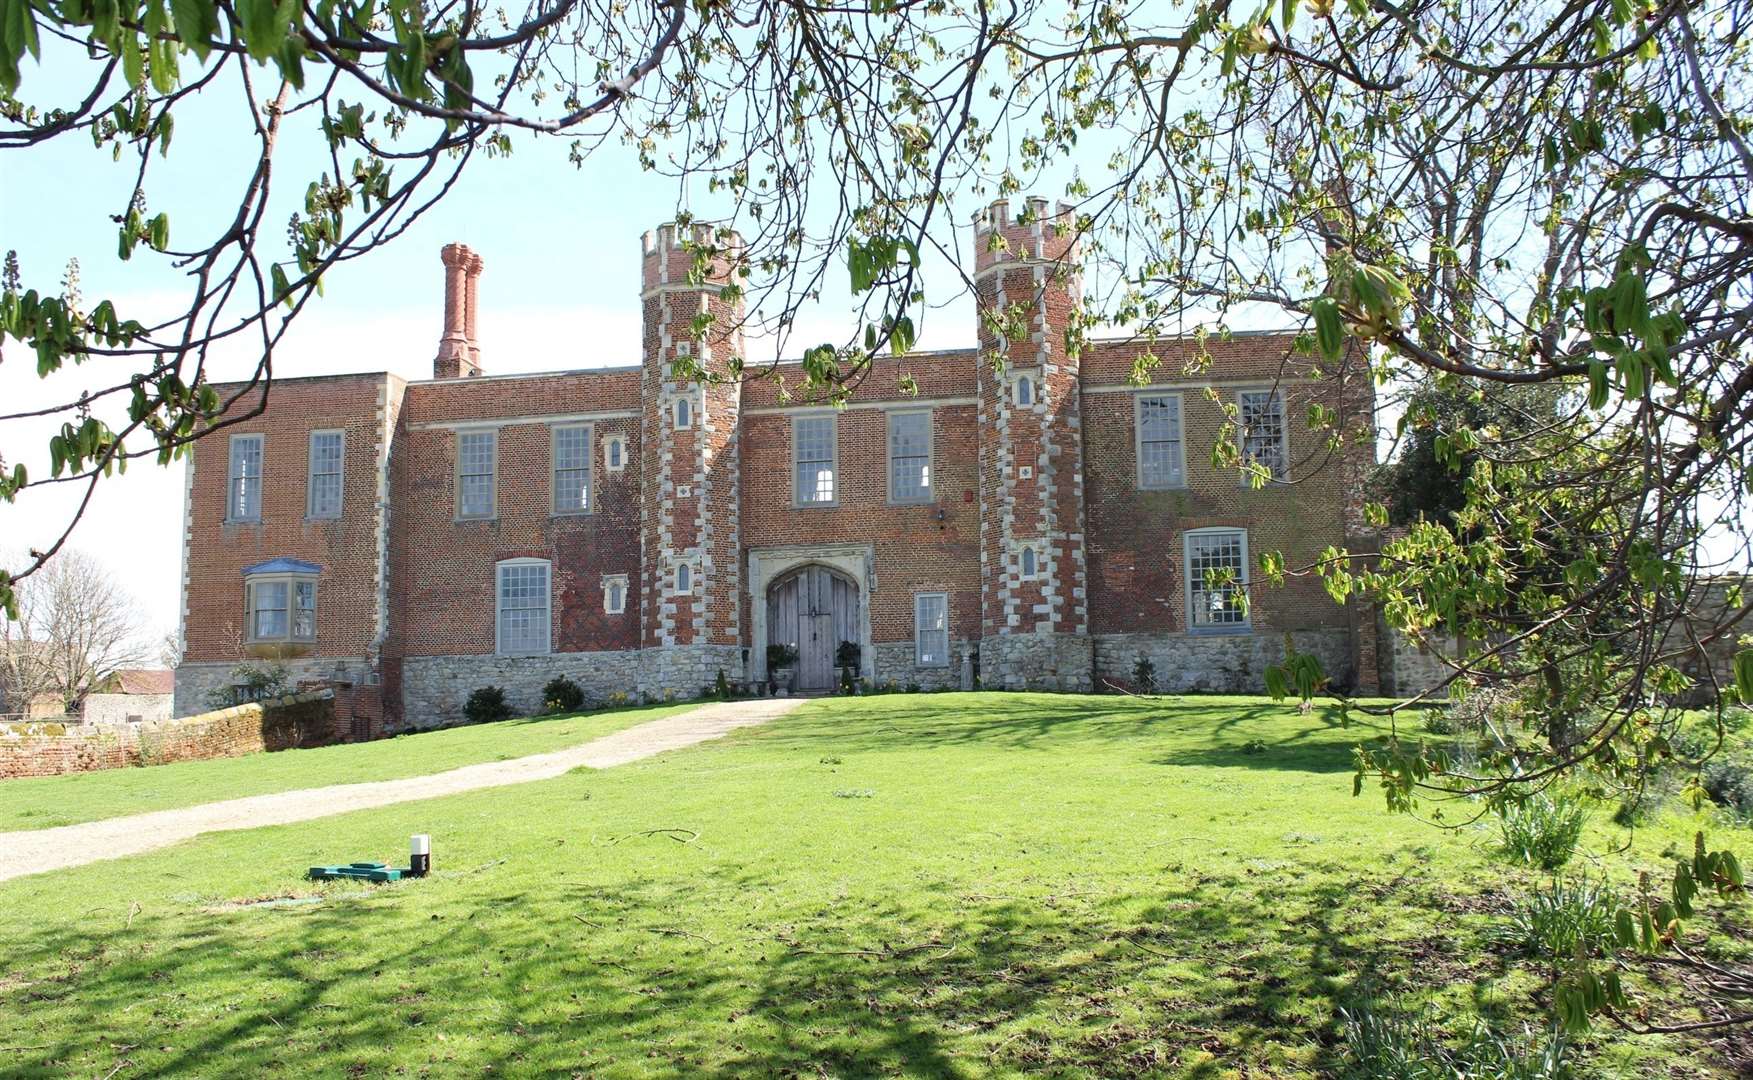 Shurland Hall at Eastchurch